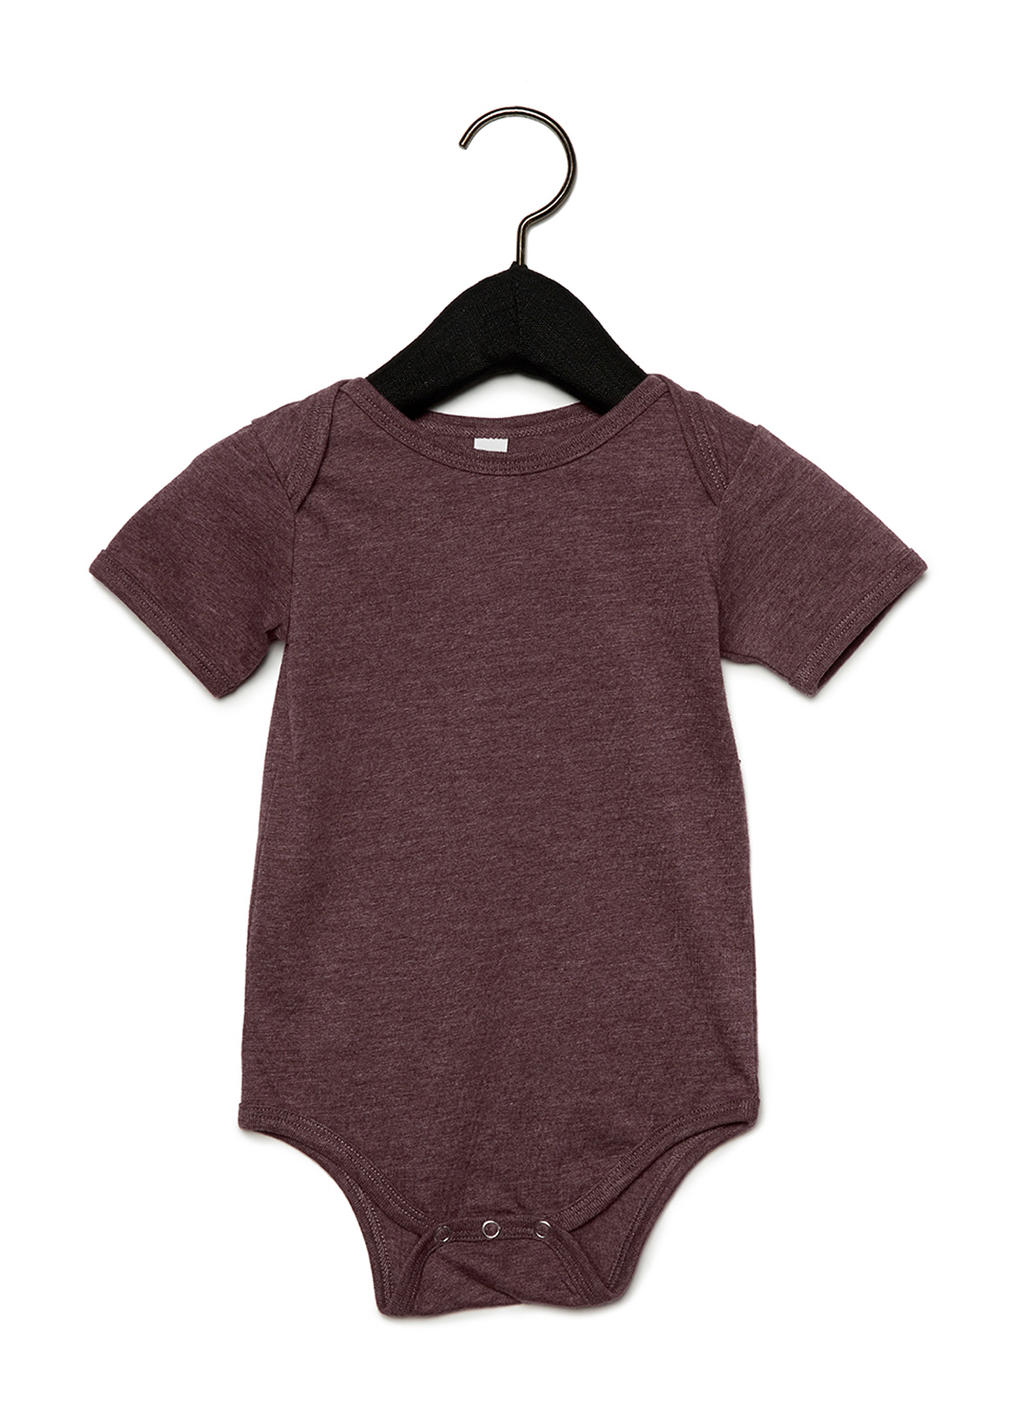  Baby Jersey Short Sleeve One Piece in Farbe Heather Maroon